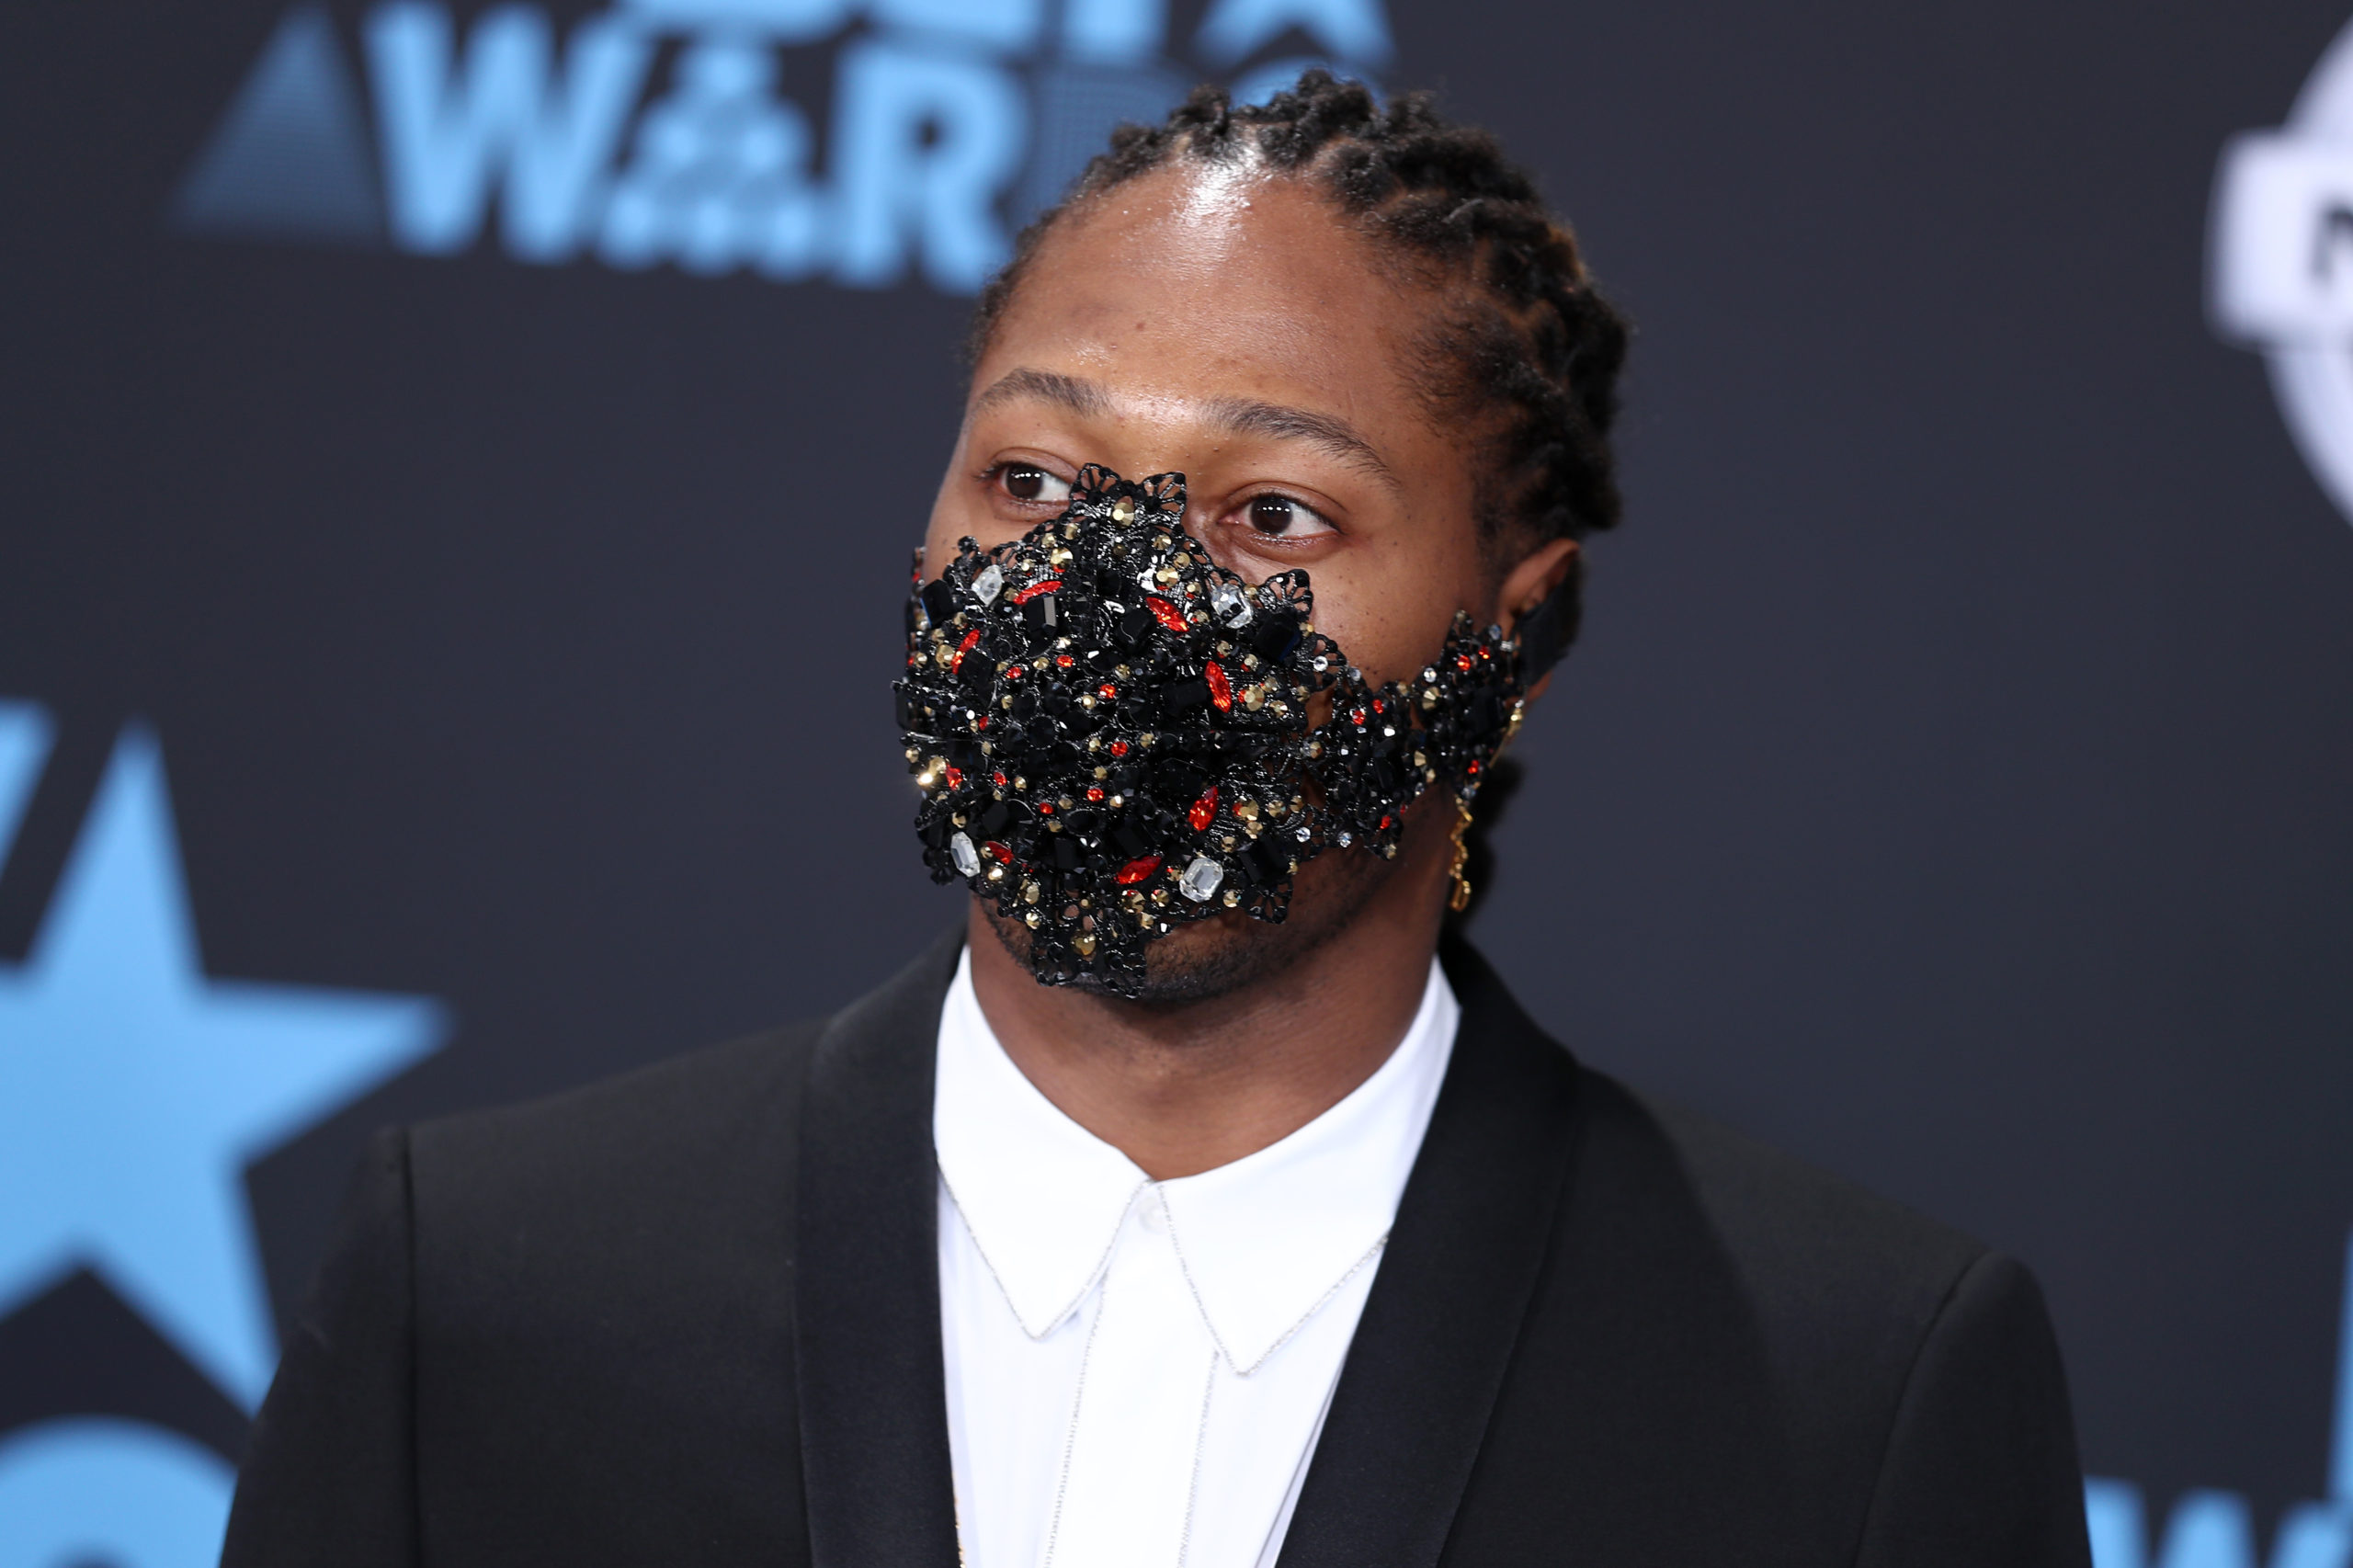 Future Partners With Local Atlanta Designers to Make Masks for Healthcare Workers